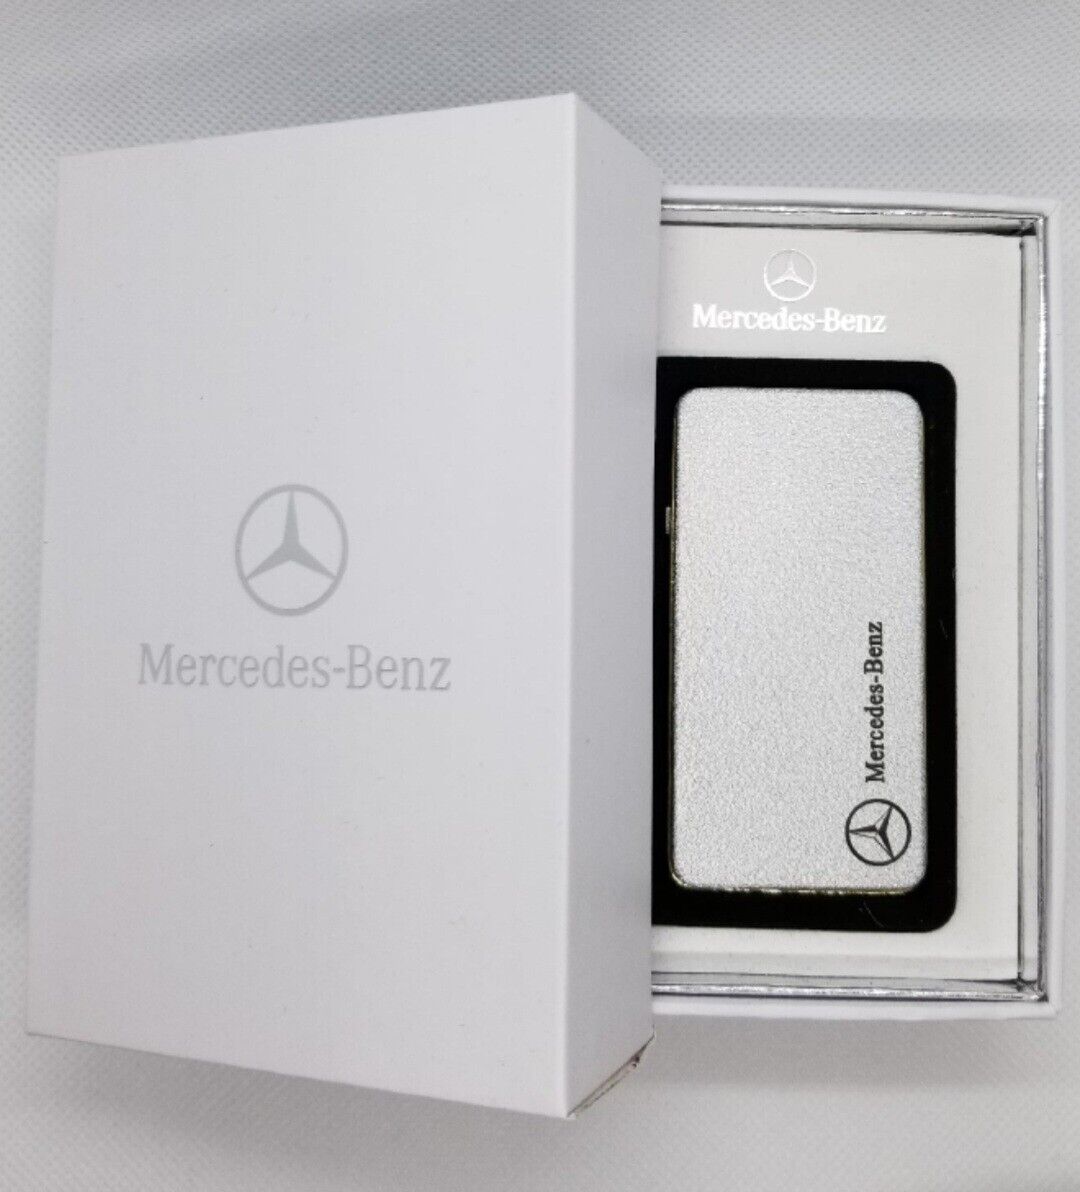 Mercedes Benz Windproof Rechargeable Heat Coil Lighter with USB Cable and Box